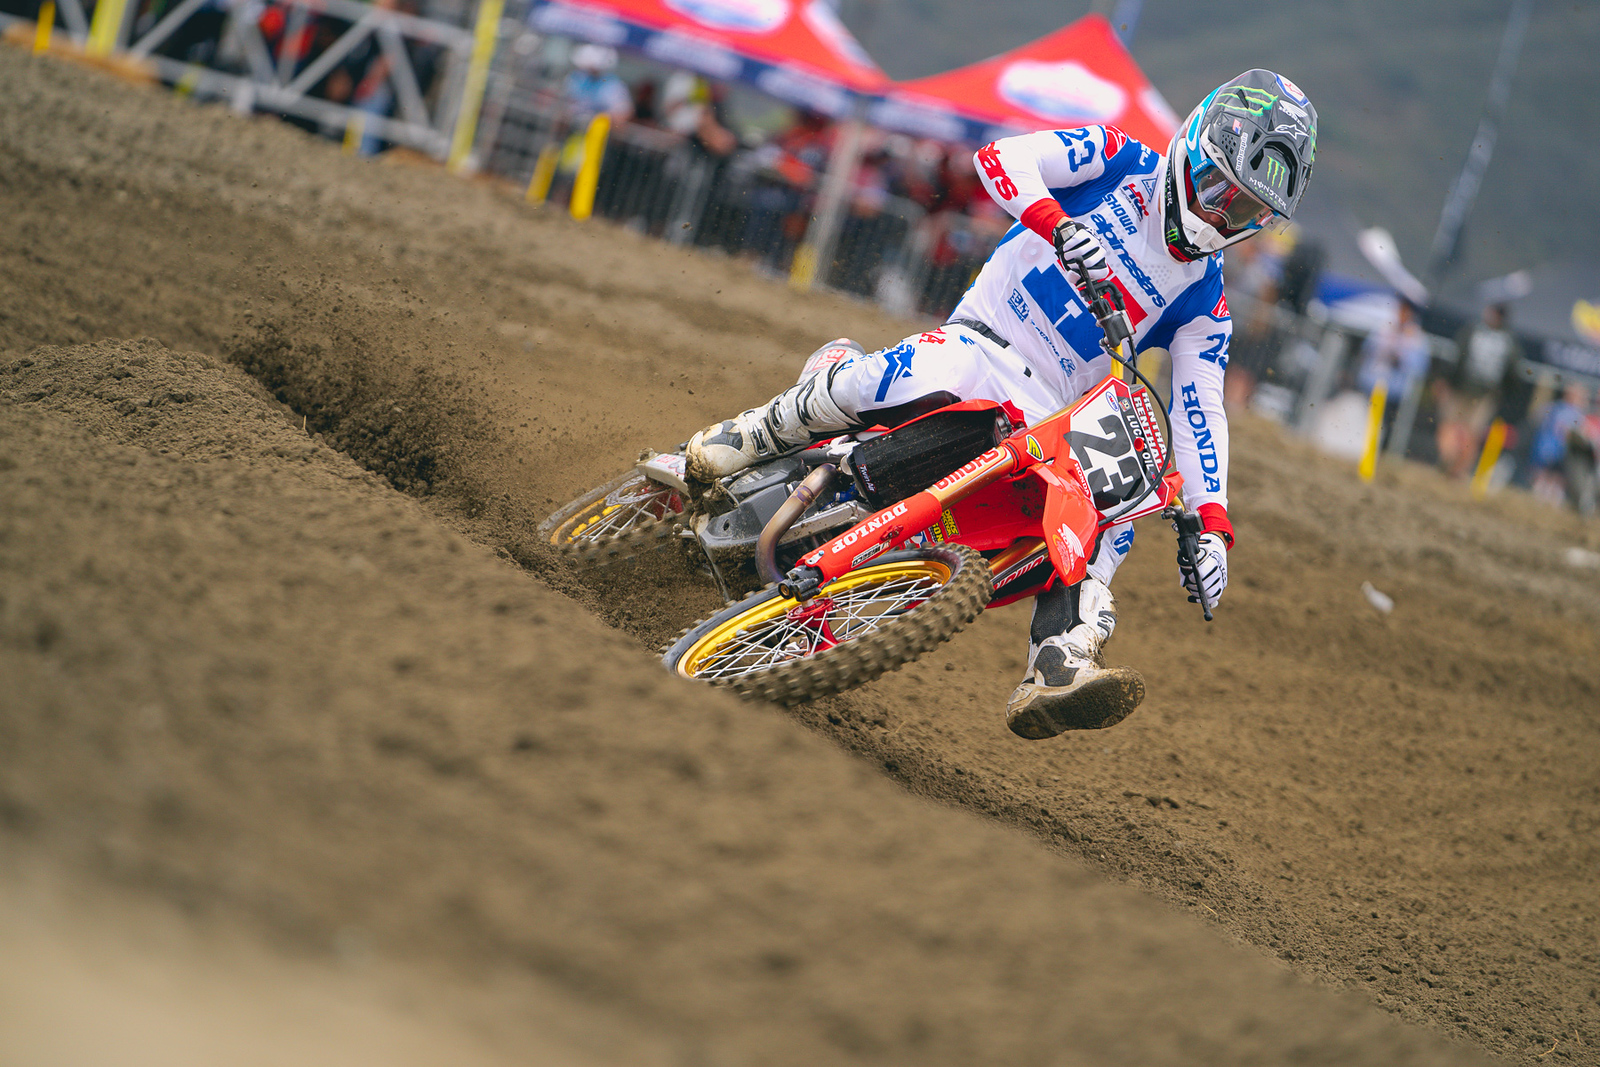 2022 Fox Raceway One Motocross Qualifying Report and Times